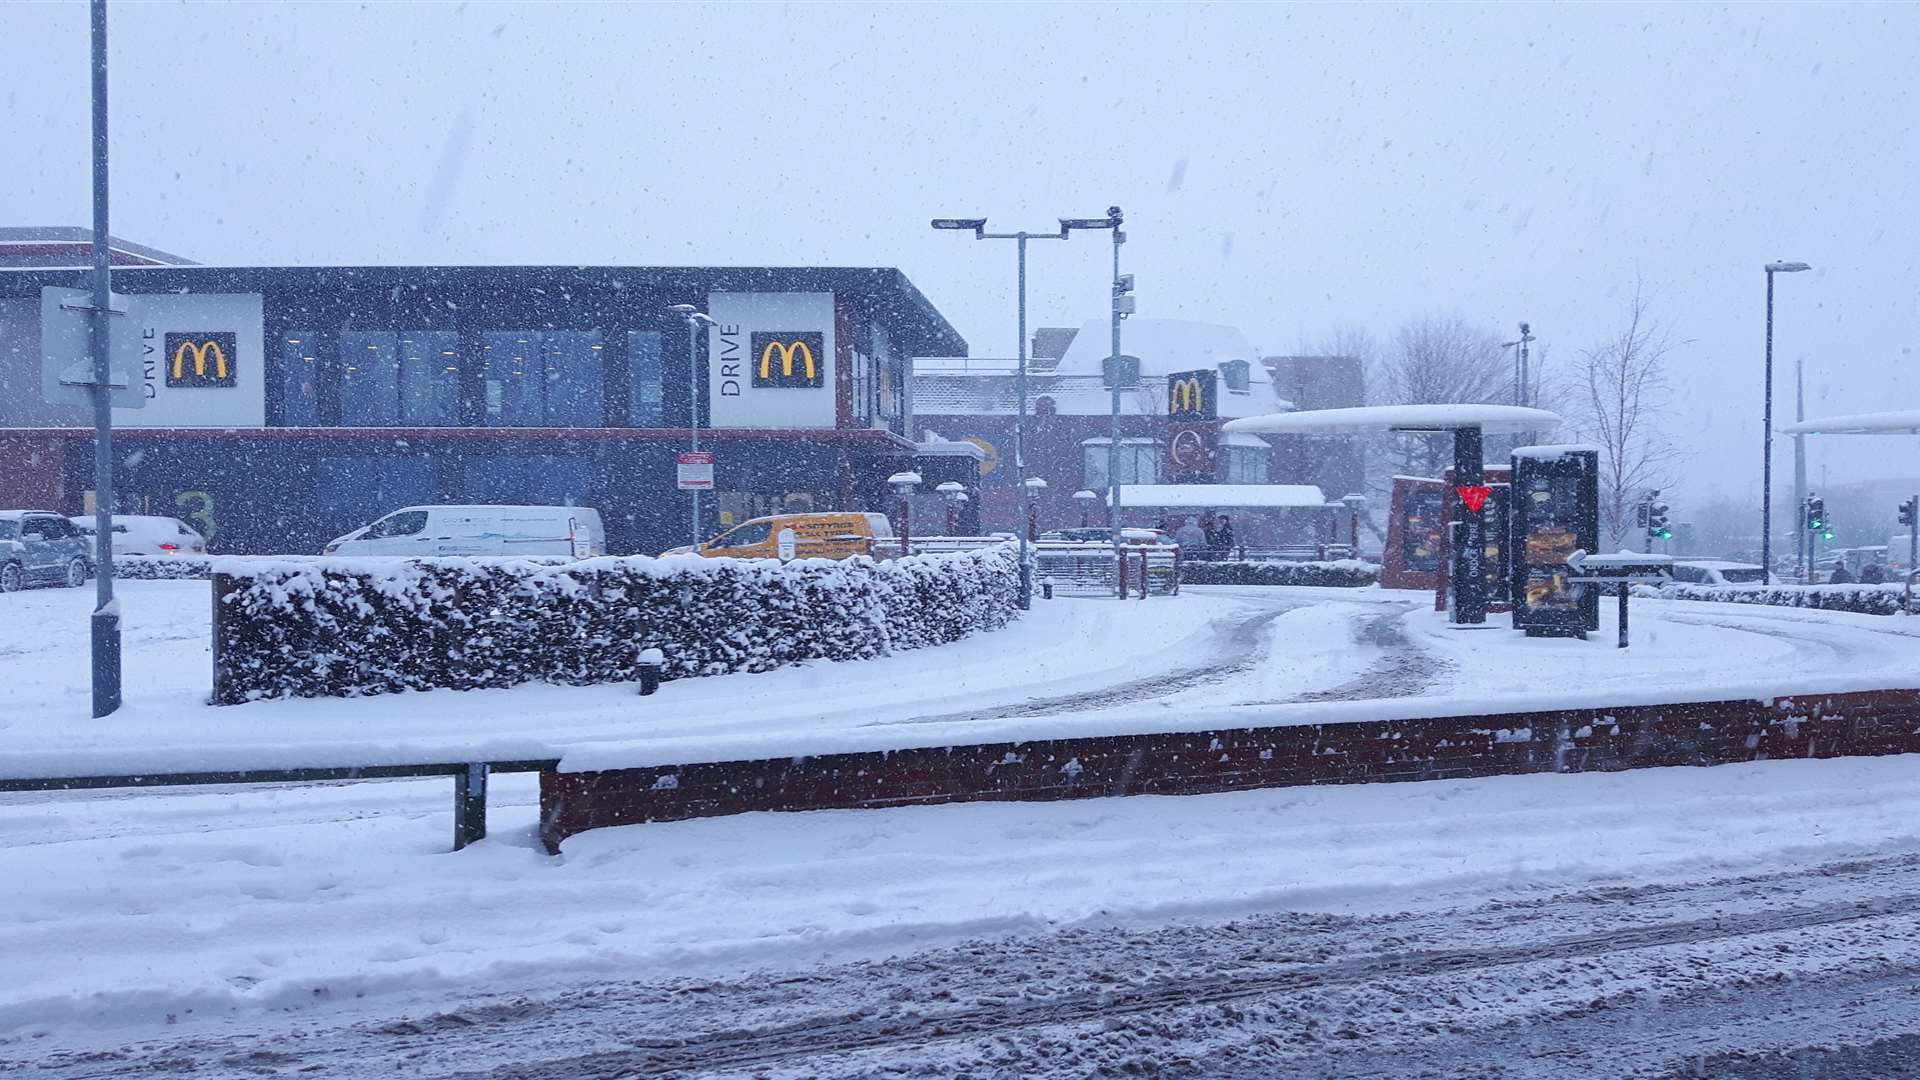 Drivers were undeterred by the snow as they collected their morning McMuffins.